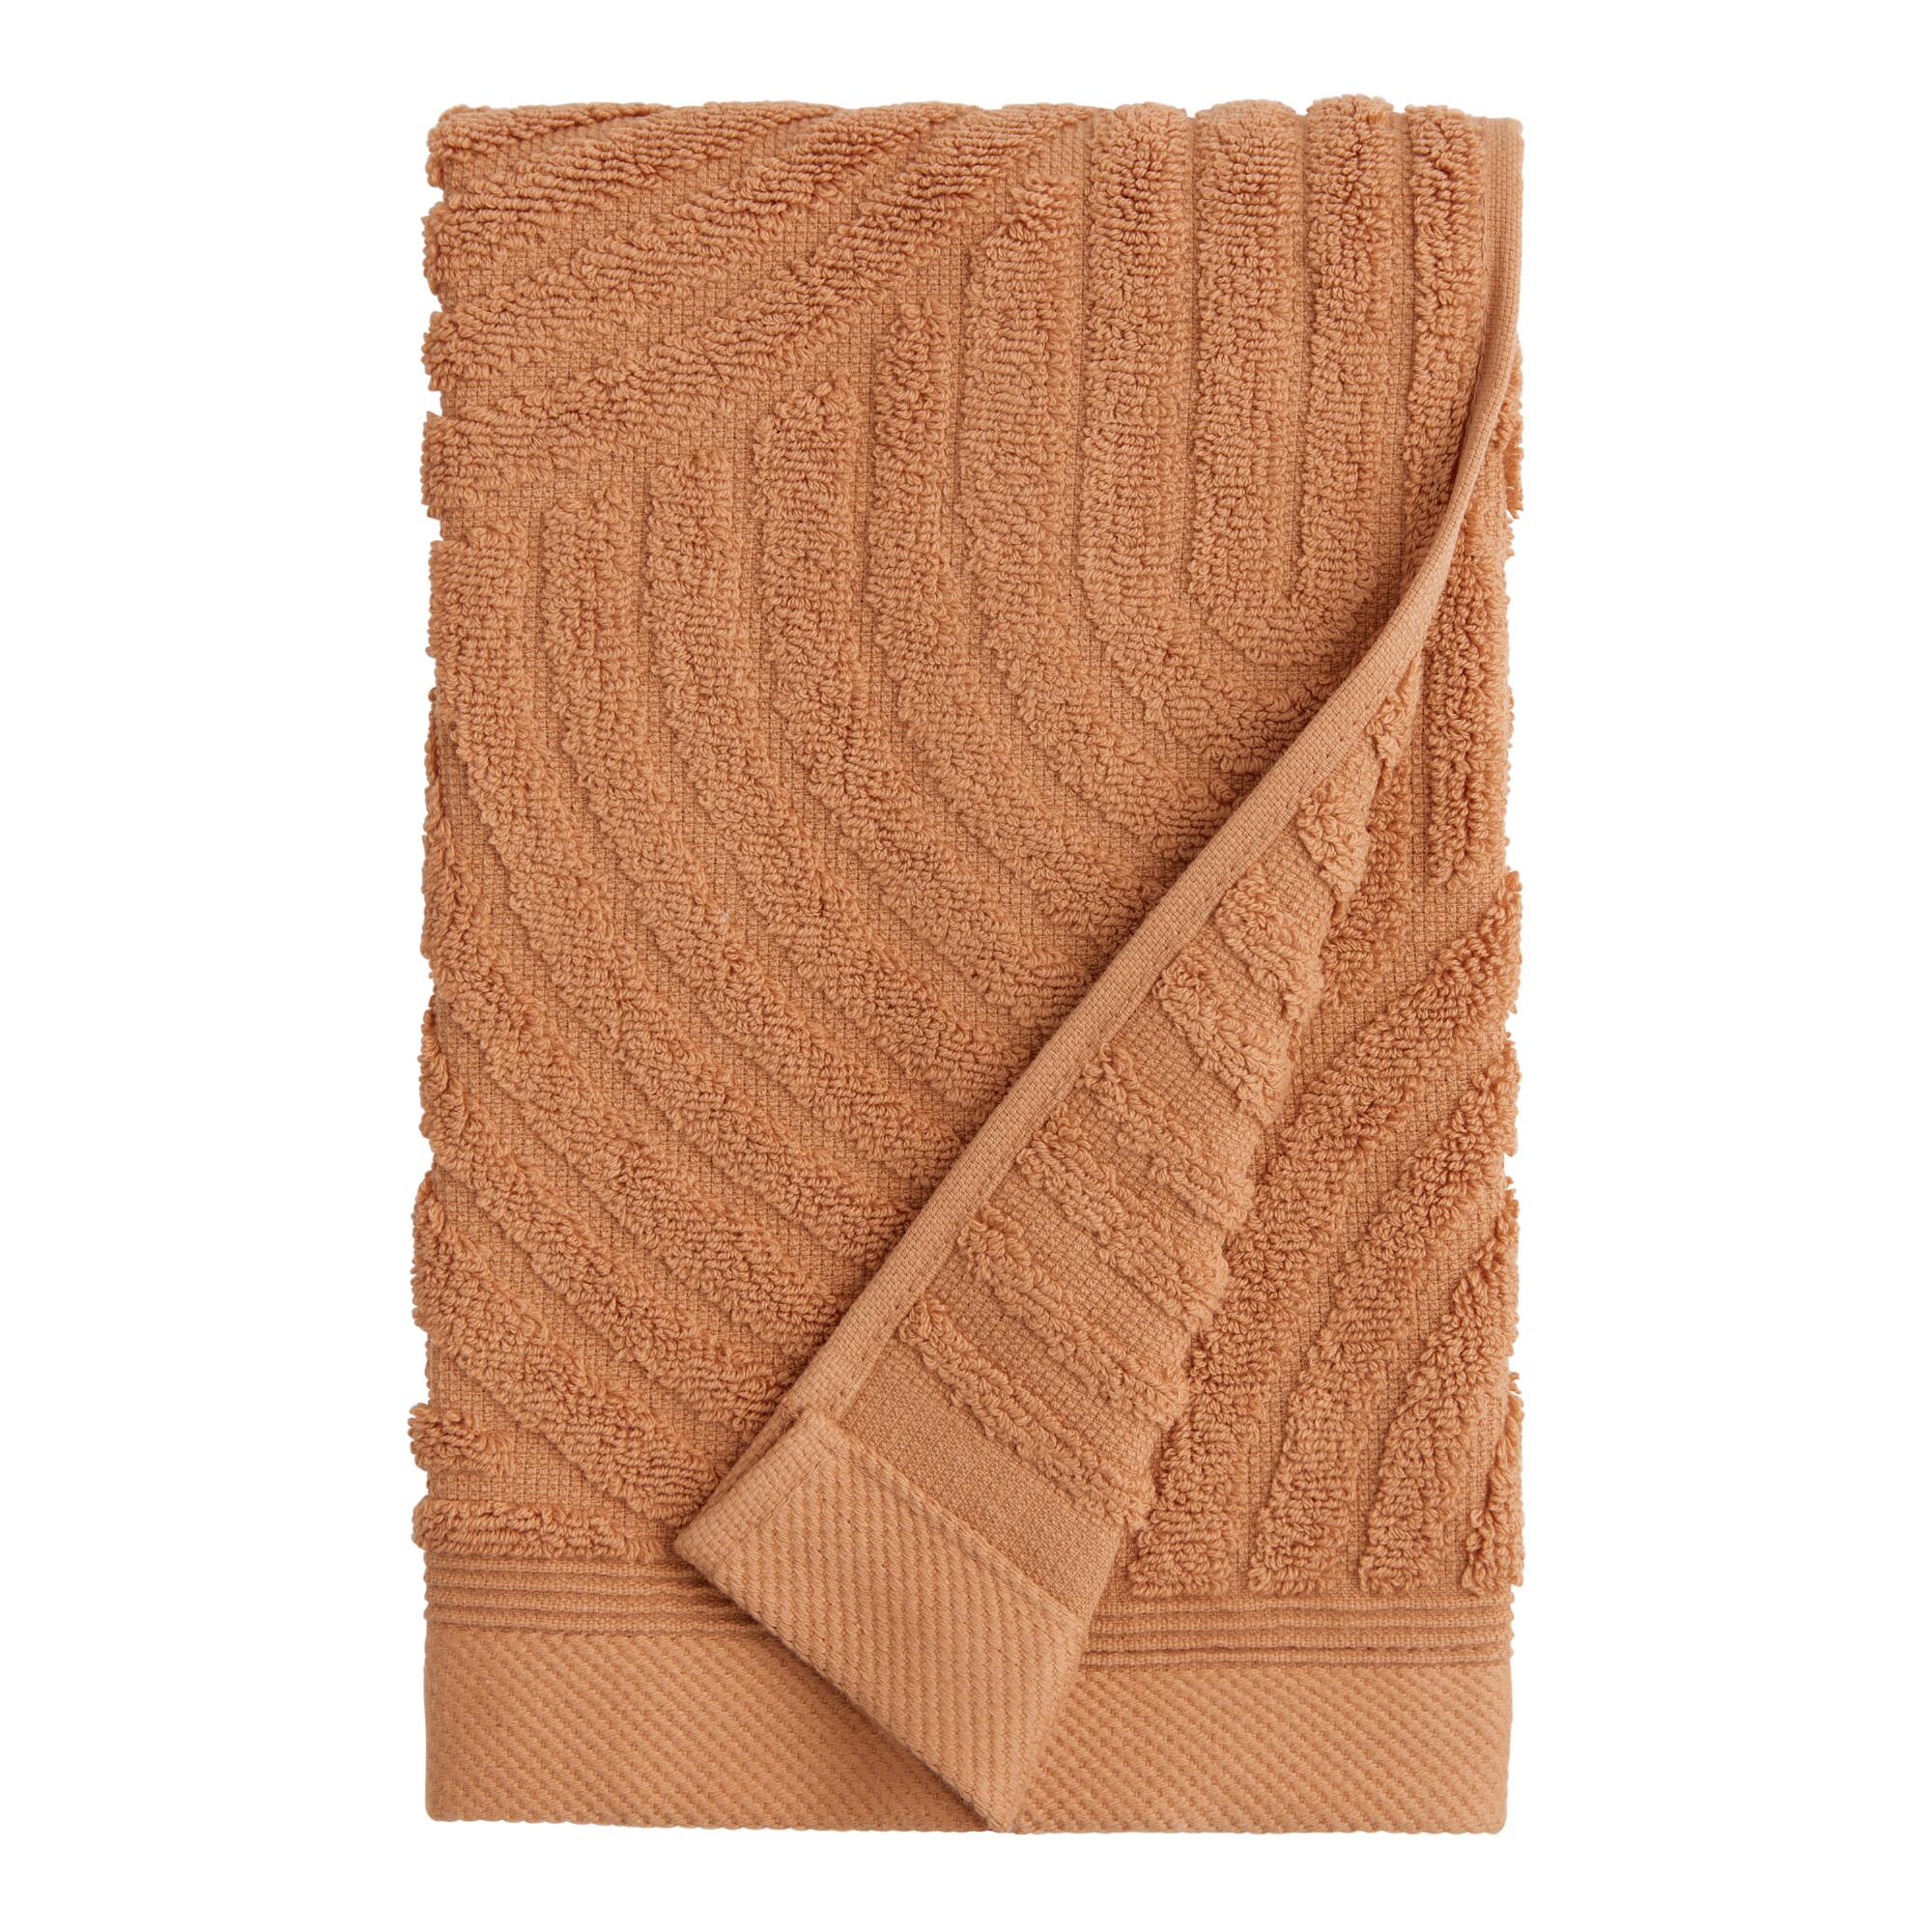 Hazel Brown Sculpted Arches Hand Towel - Cotton by World Market